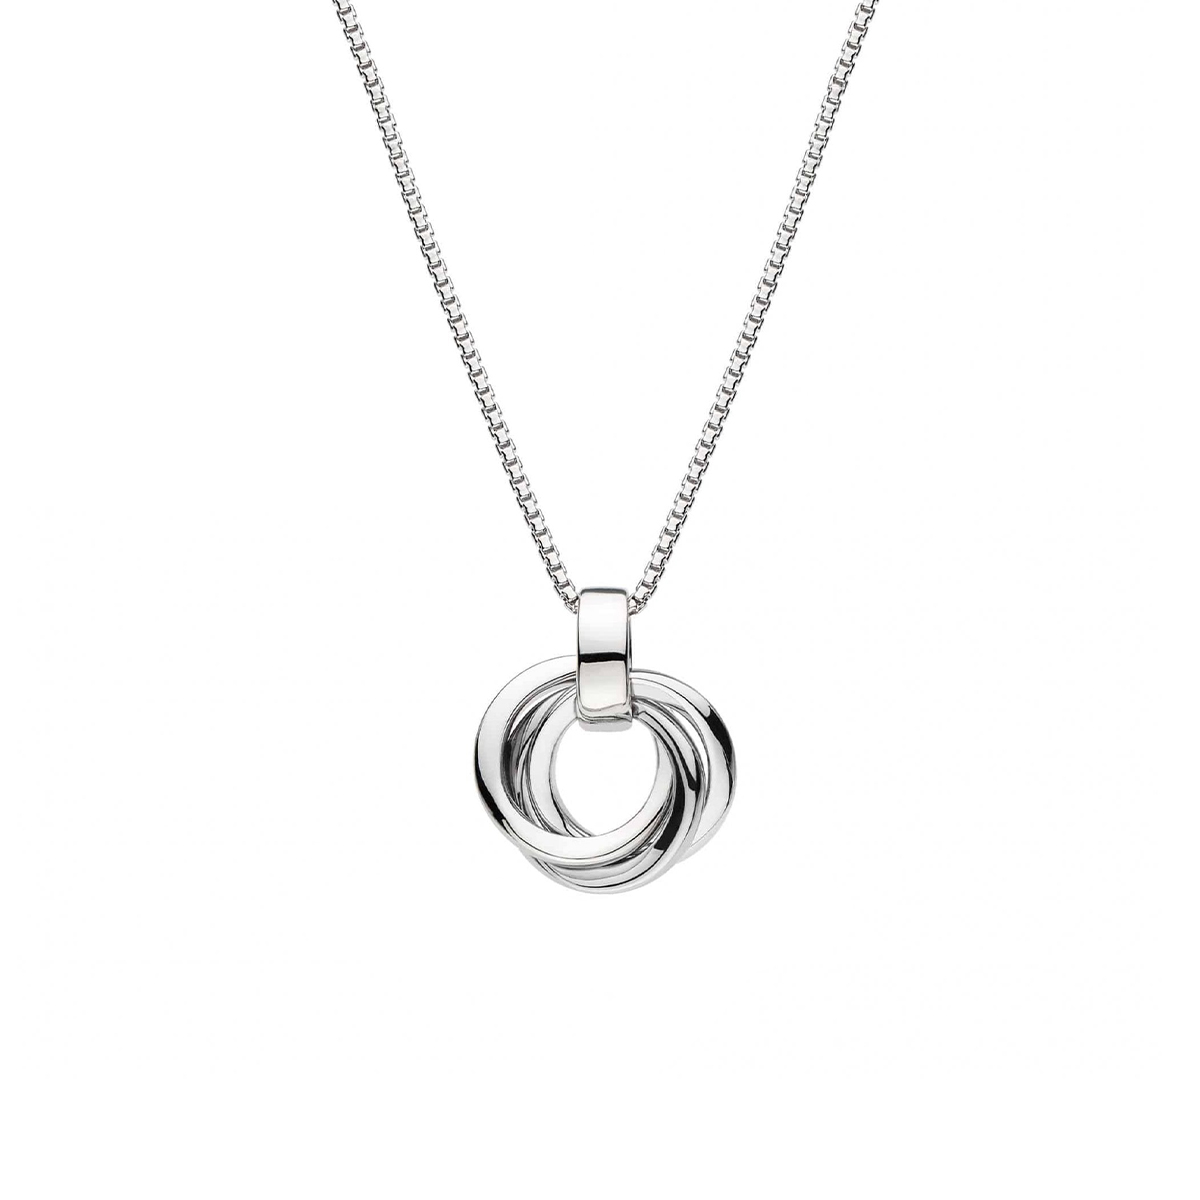 Sterling Silver Trilogy Petite Pendant with Chain